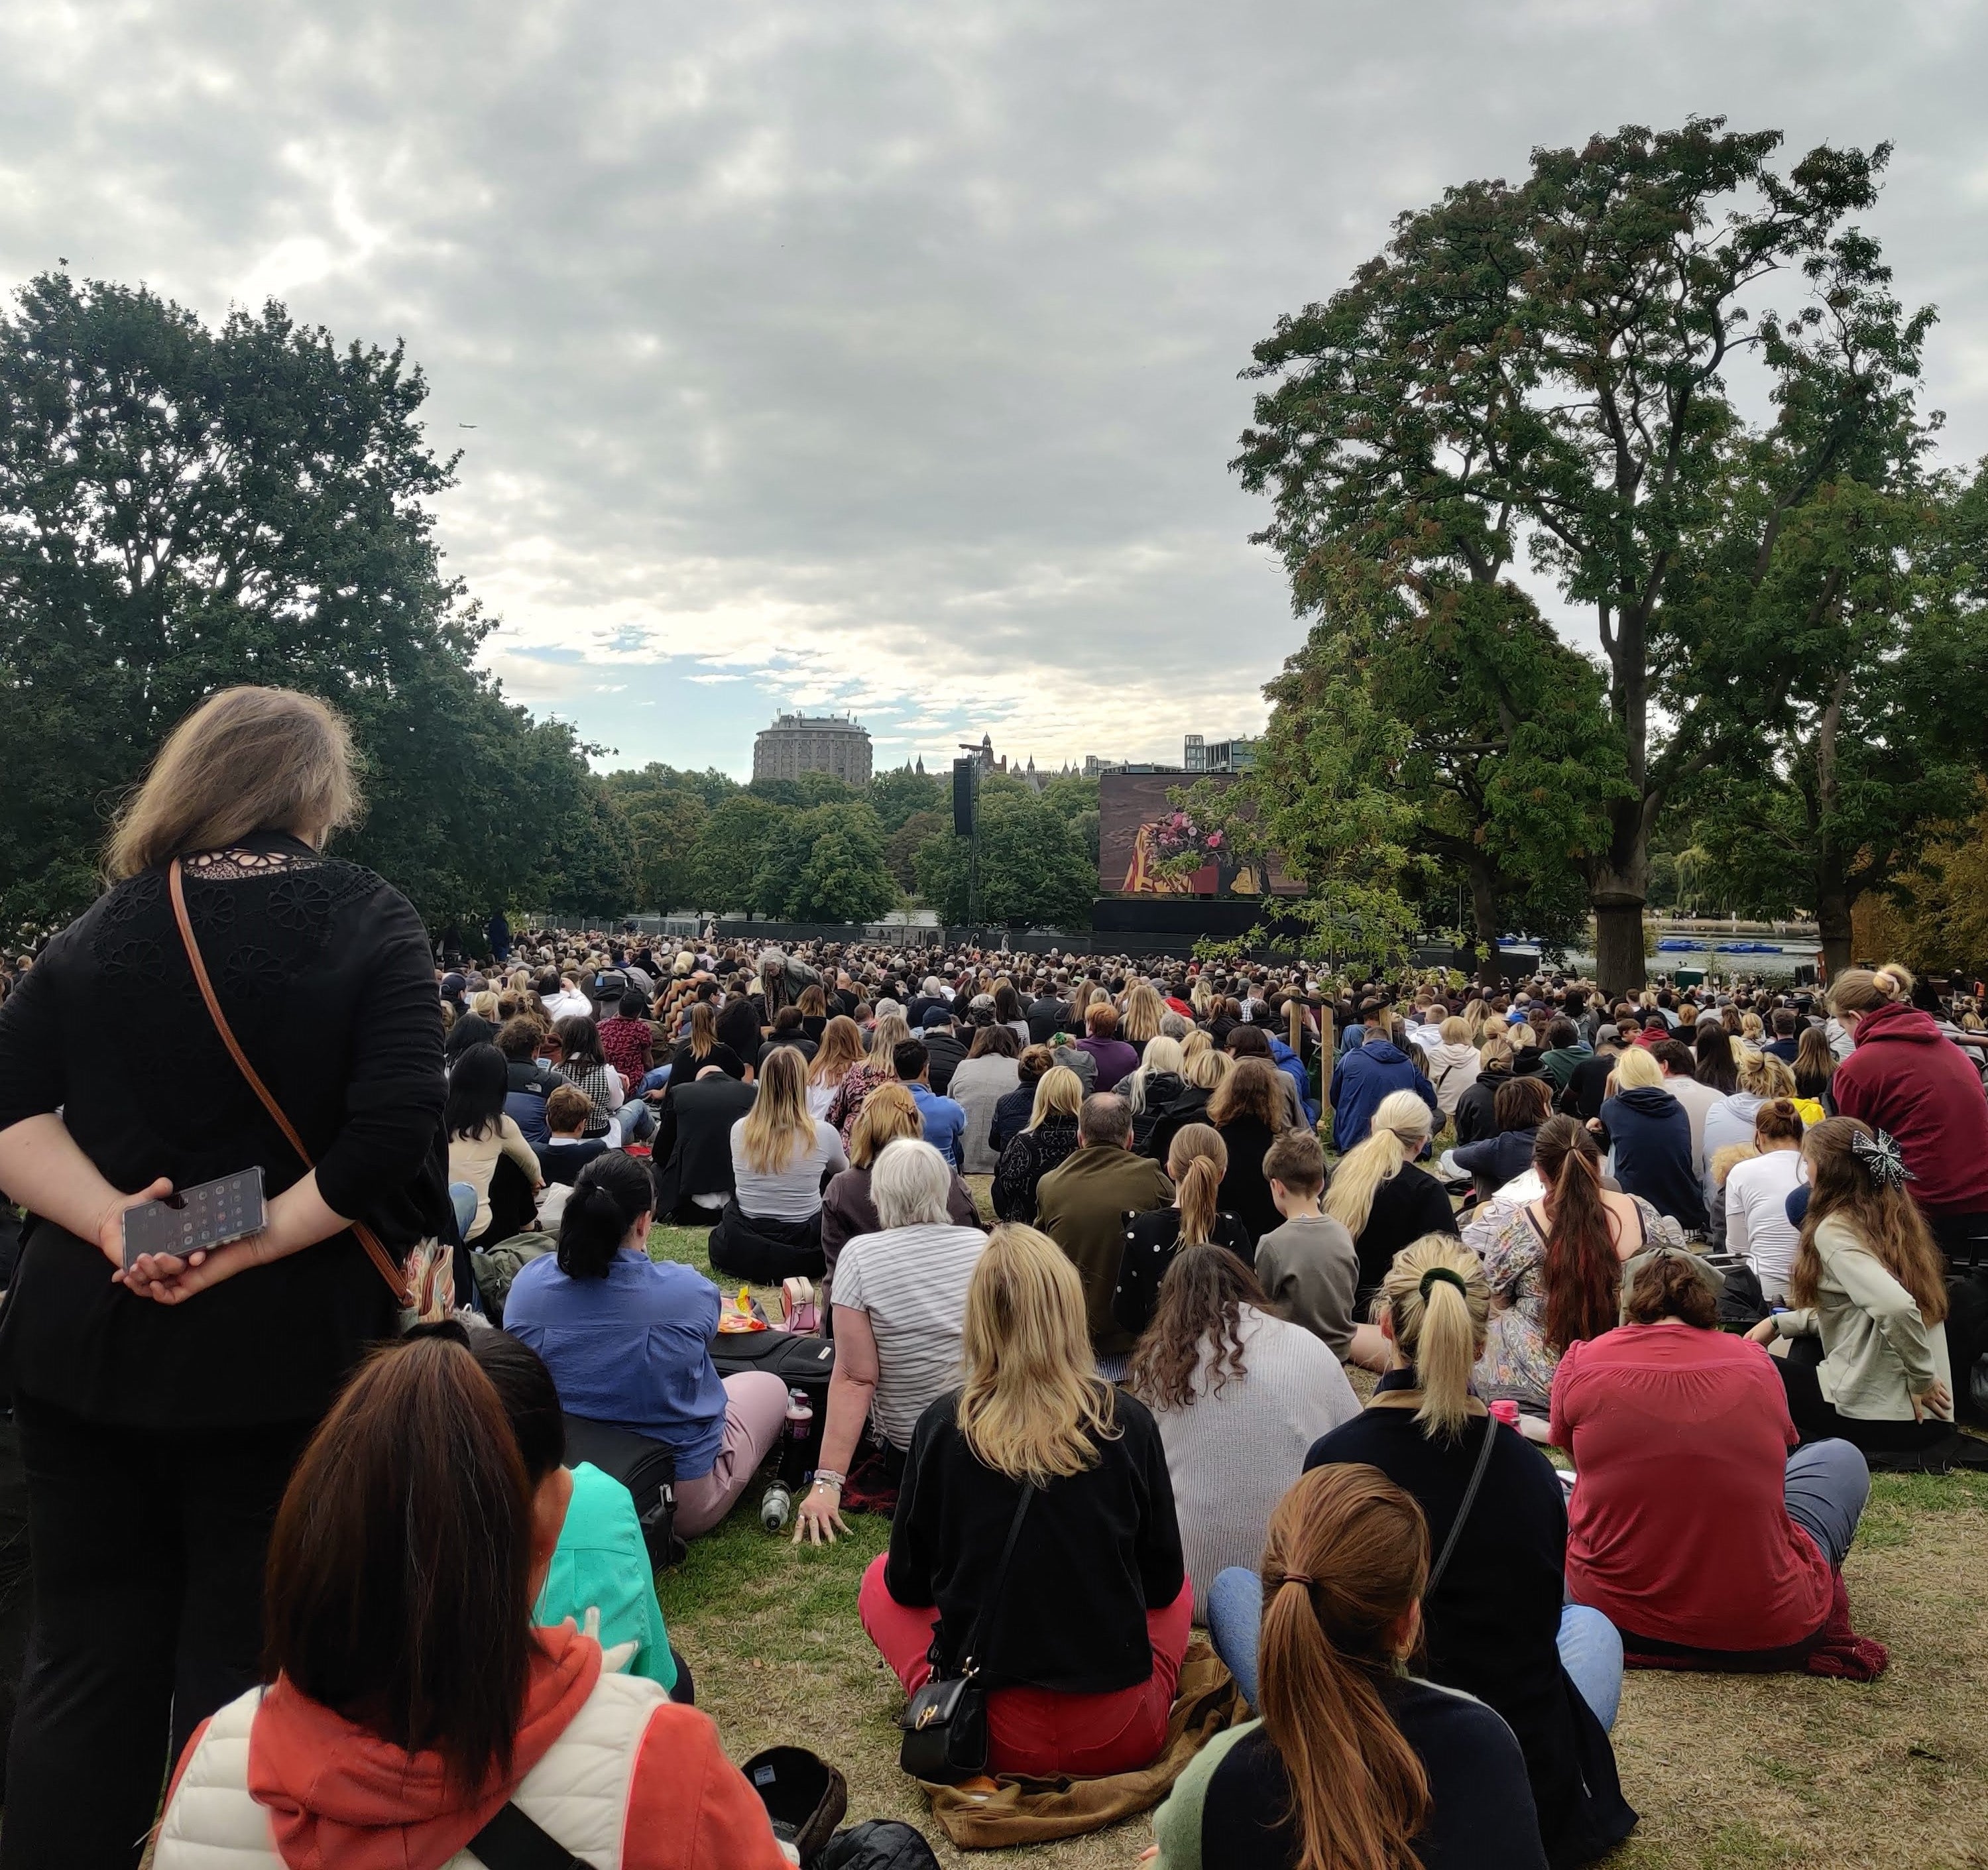 Thousands sit and watch the Queen’s funeral at Hyde Park